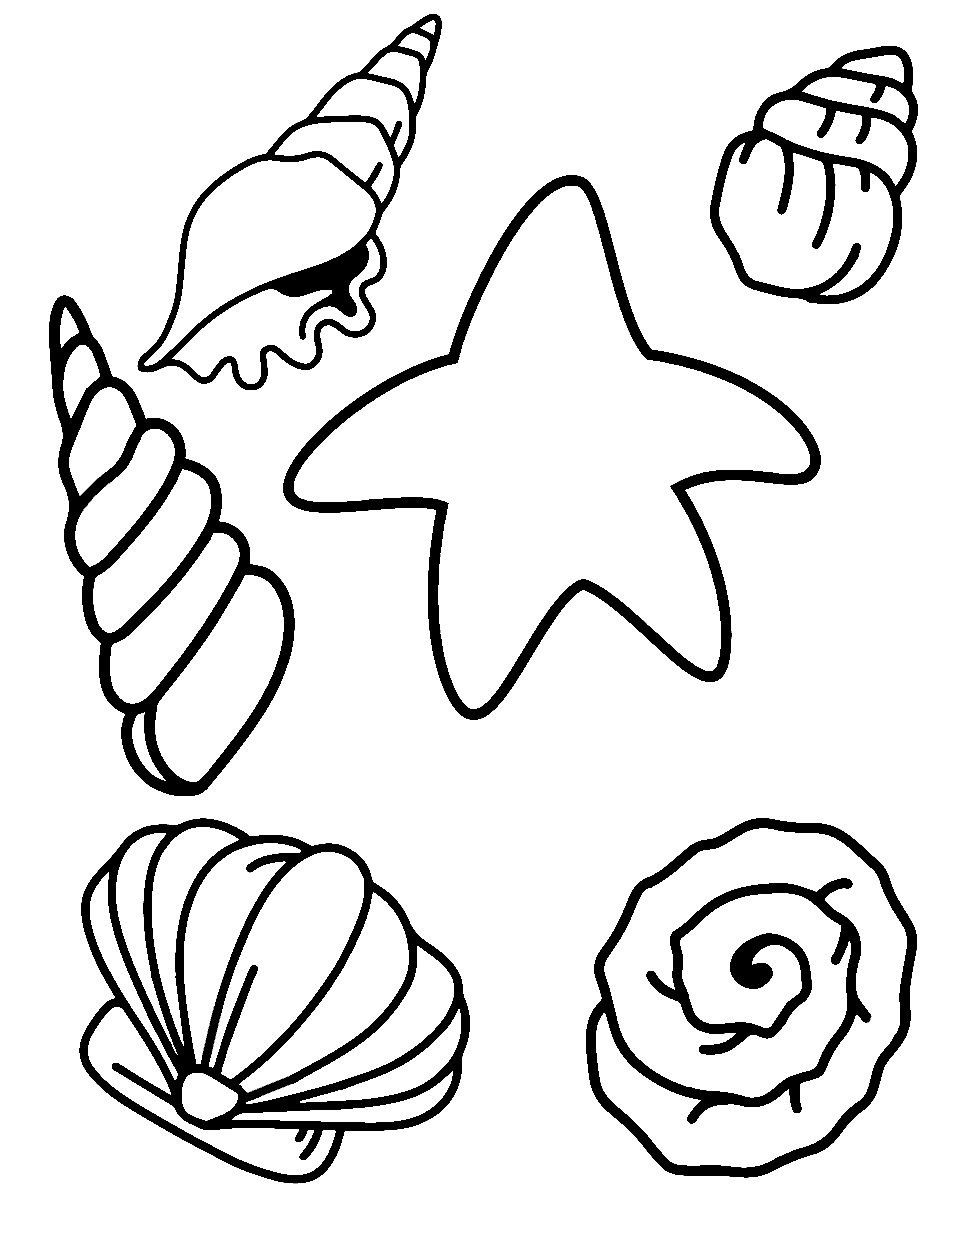 Starfish and Shells Collection Ocean Coloring Page - Different types of starfish and shells scattered on the sand.